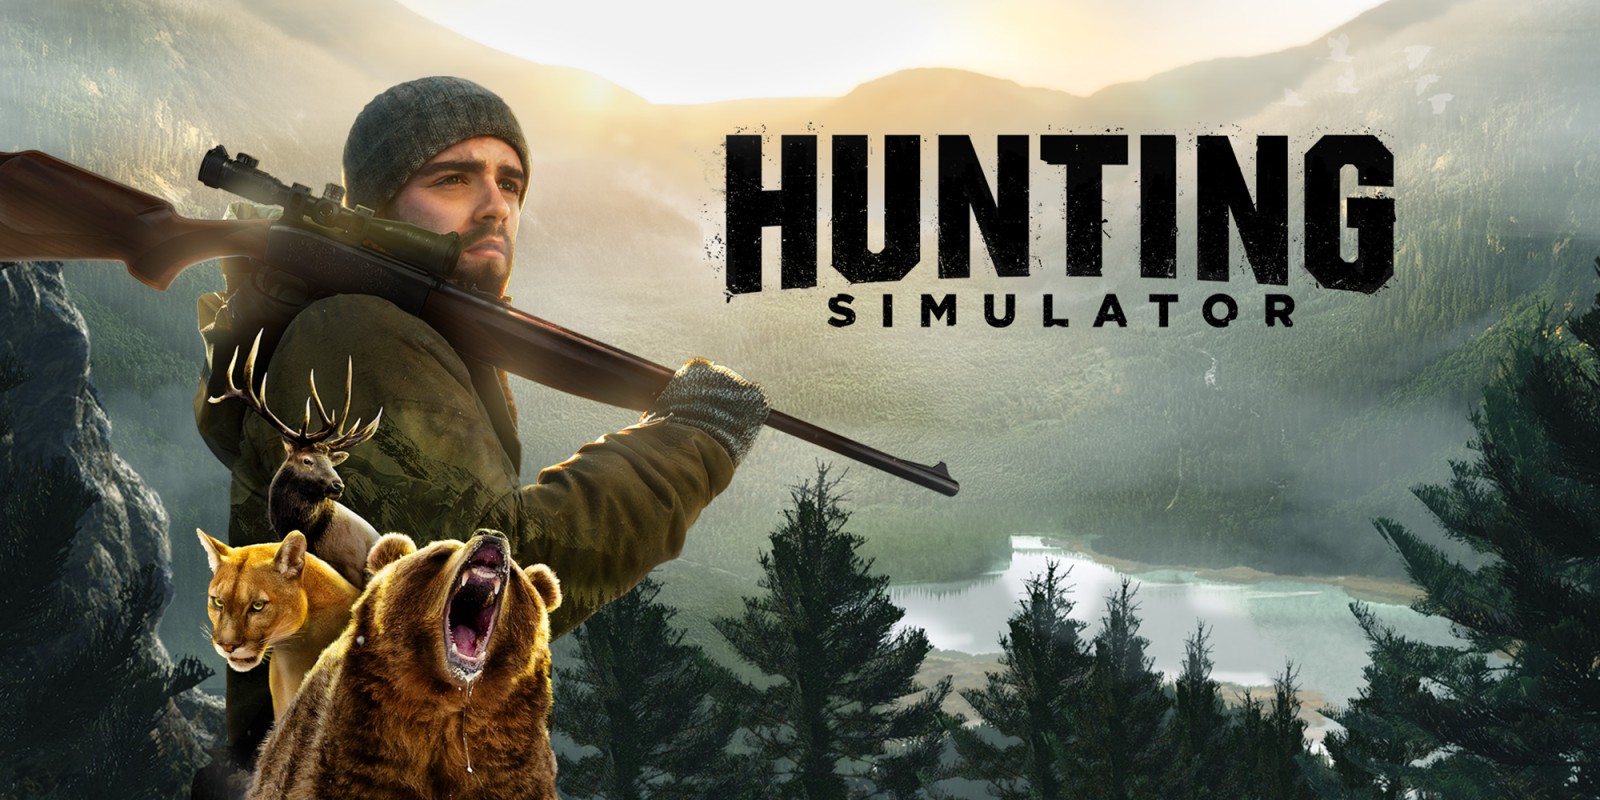 Hunting simulator switch review